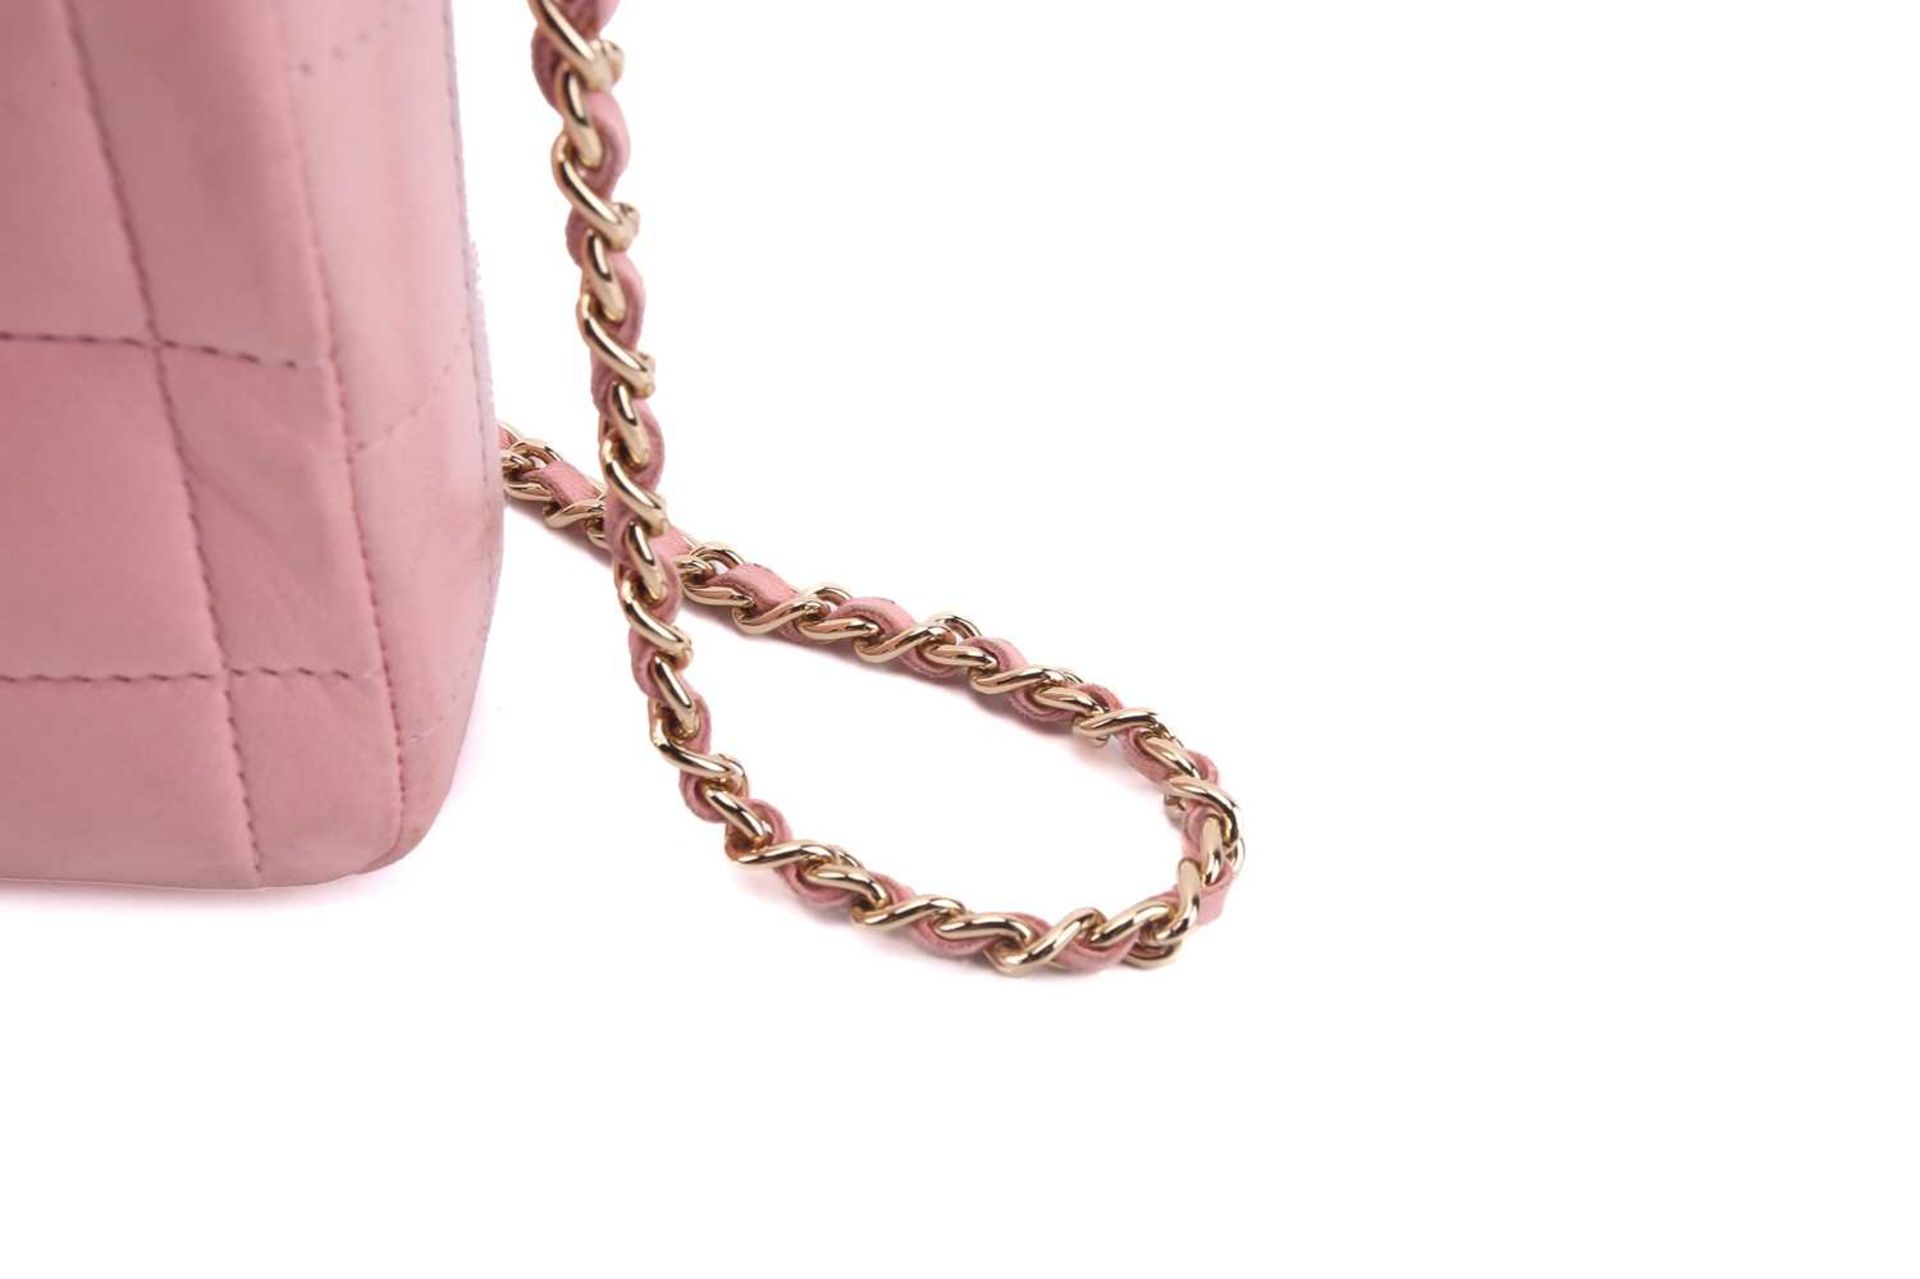 Chanel - an East West Chocolate Bar bag in baby pink lambskin leather, elongated rectangular body - Image 11 of 13